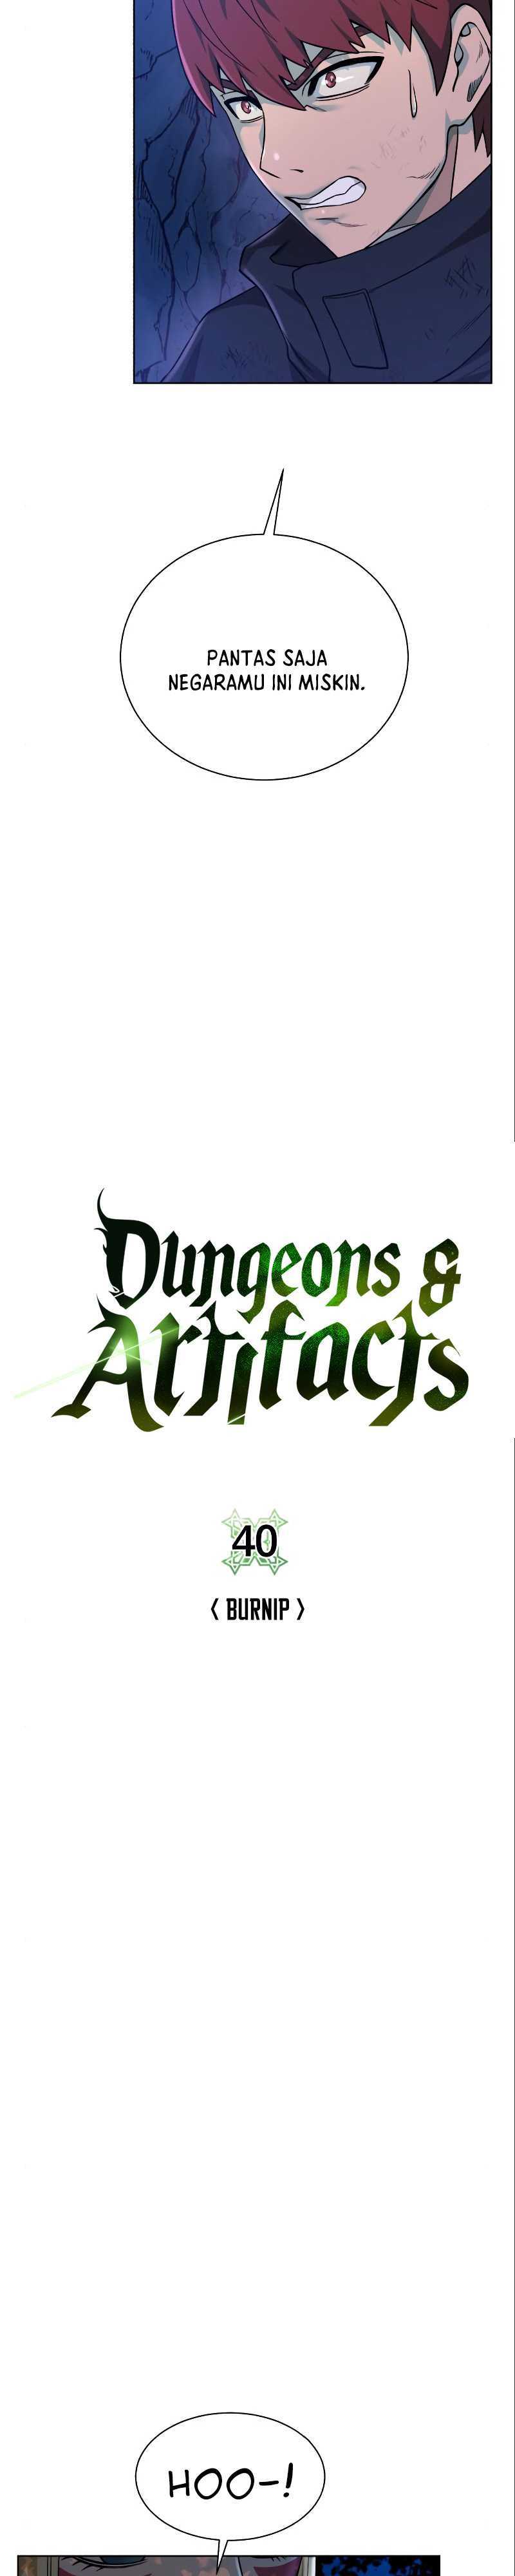 dungeons-artifacts Chapter chapter-40